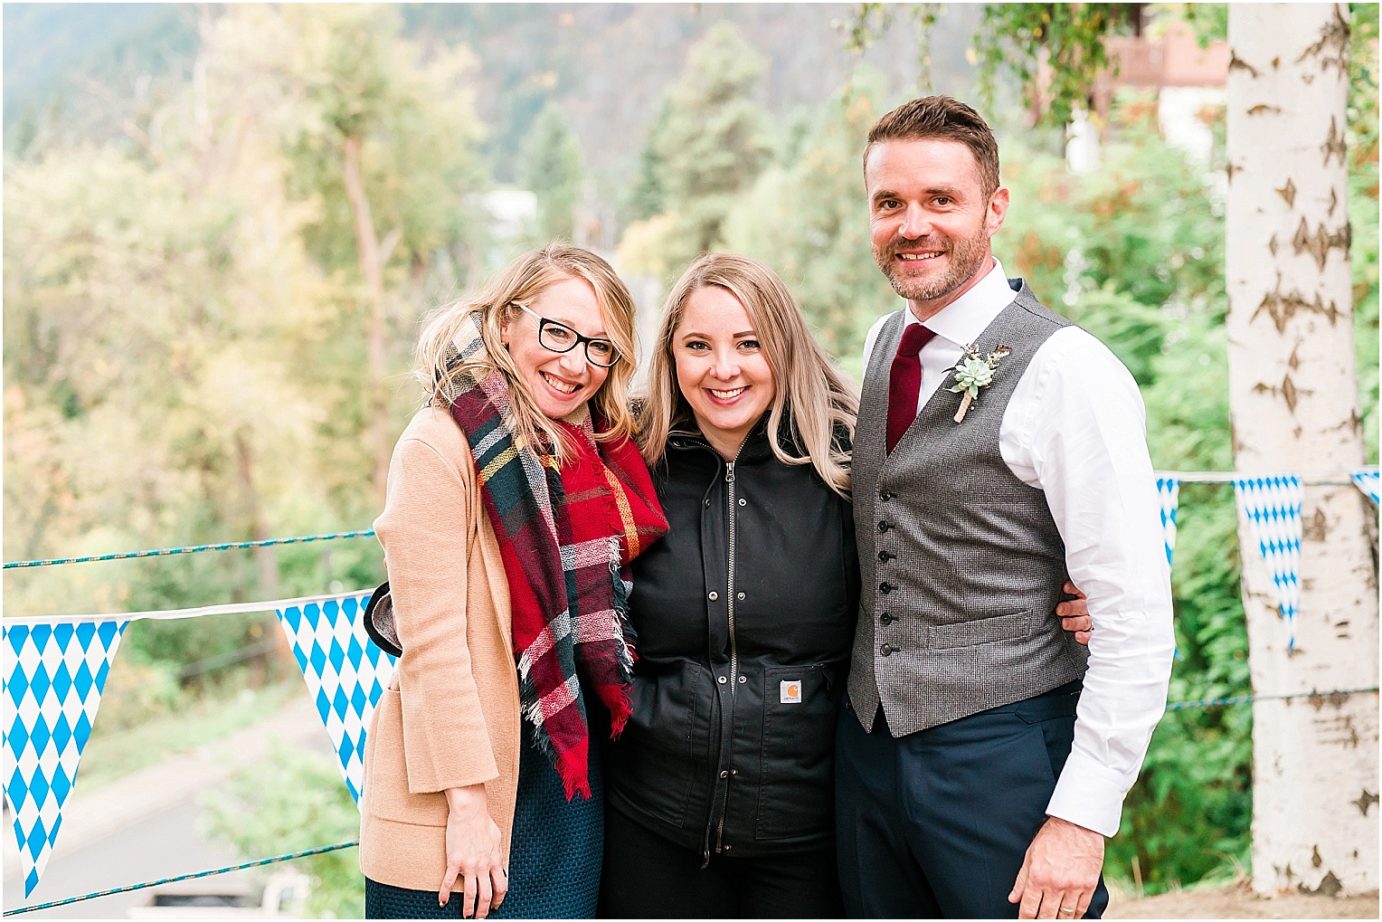 Intimate Leavenworth Elopement Rick and Tracey Leavenworth Photographer bride and groom with Misty C Photography